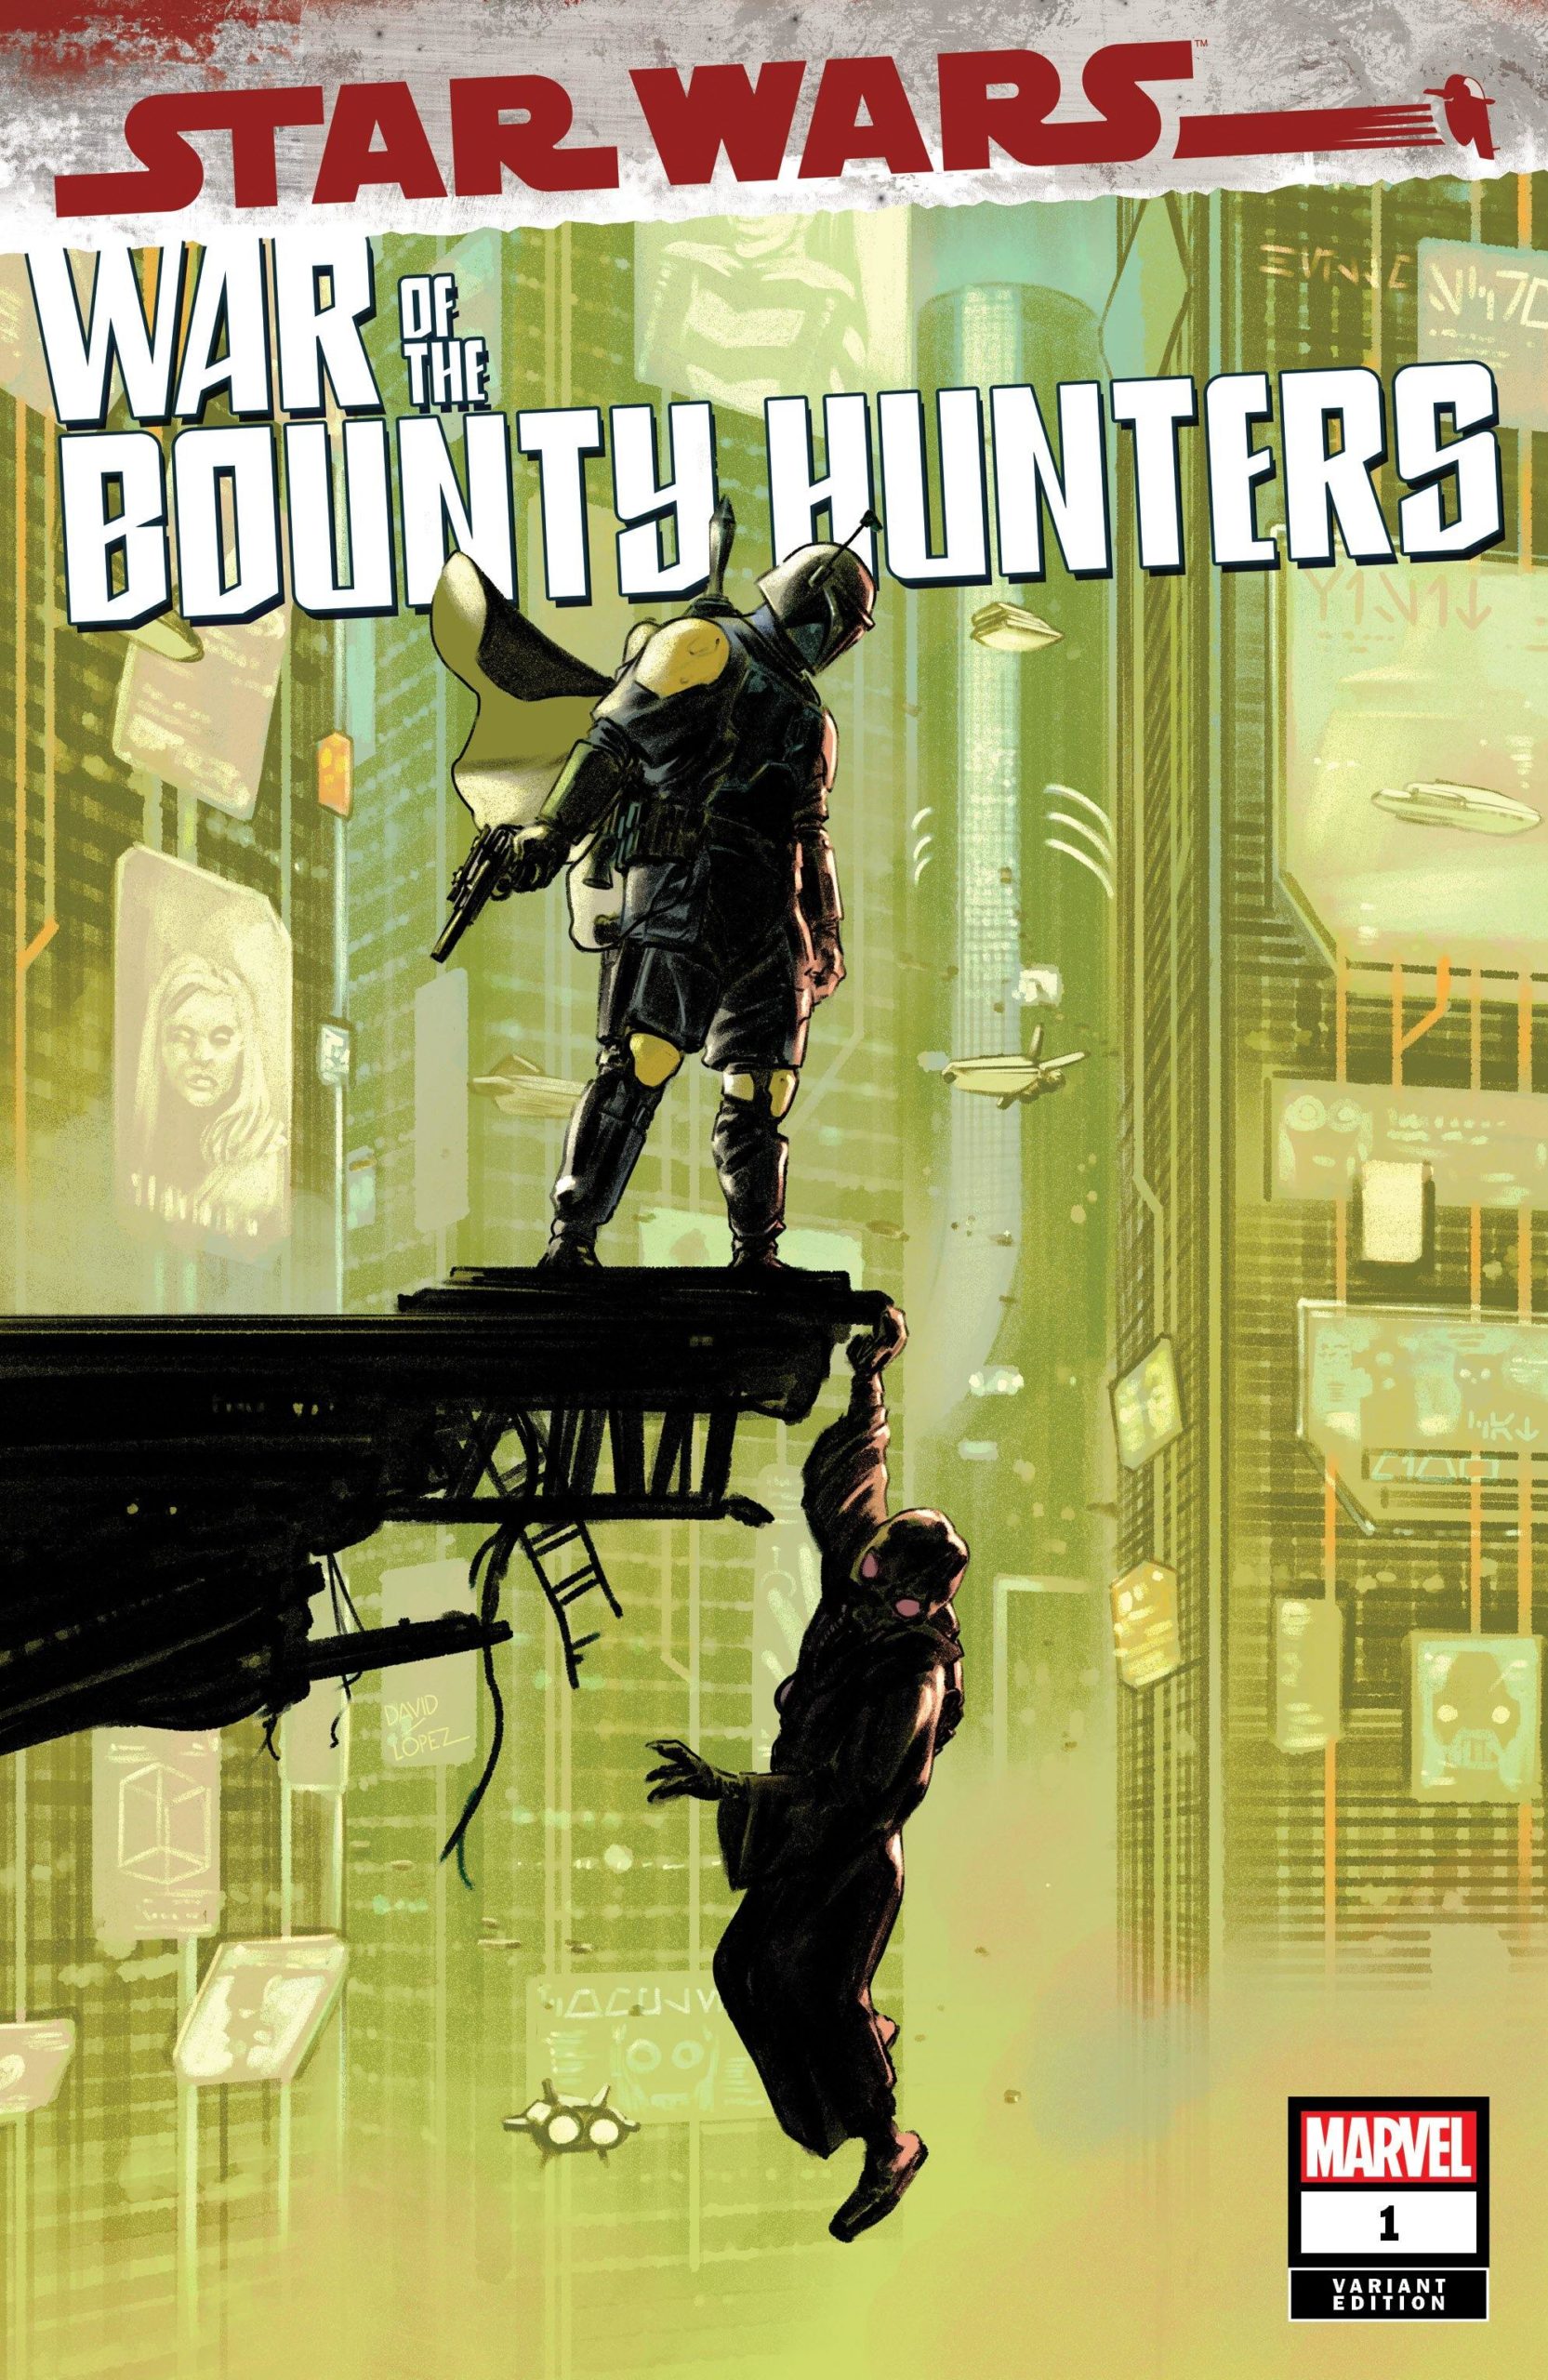 War of the Bounty Hunters #1 (David Lopez Sunset Comix Variant Cover) (02.06.2021)